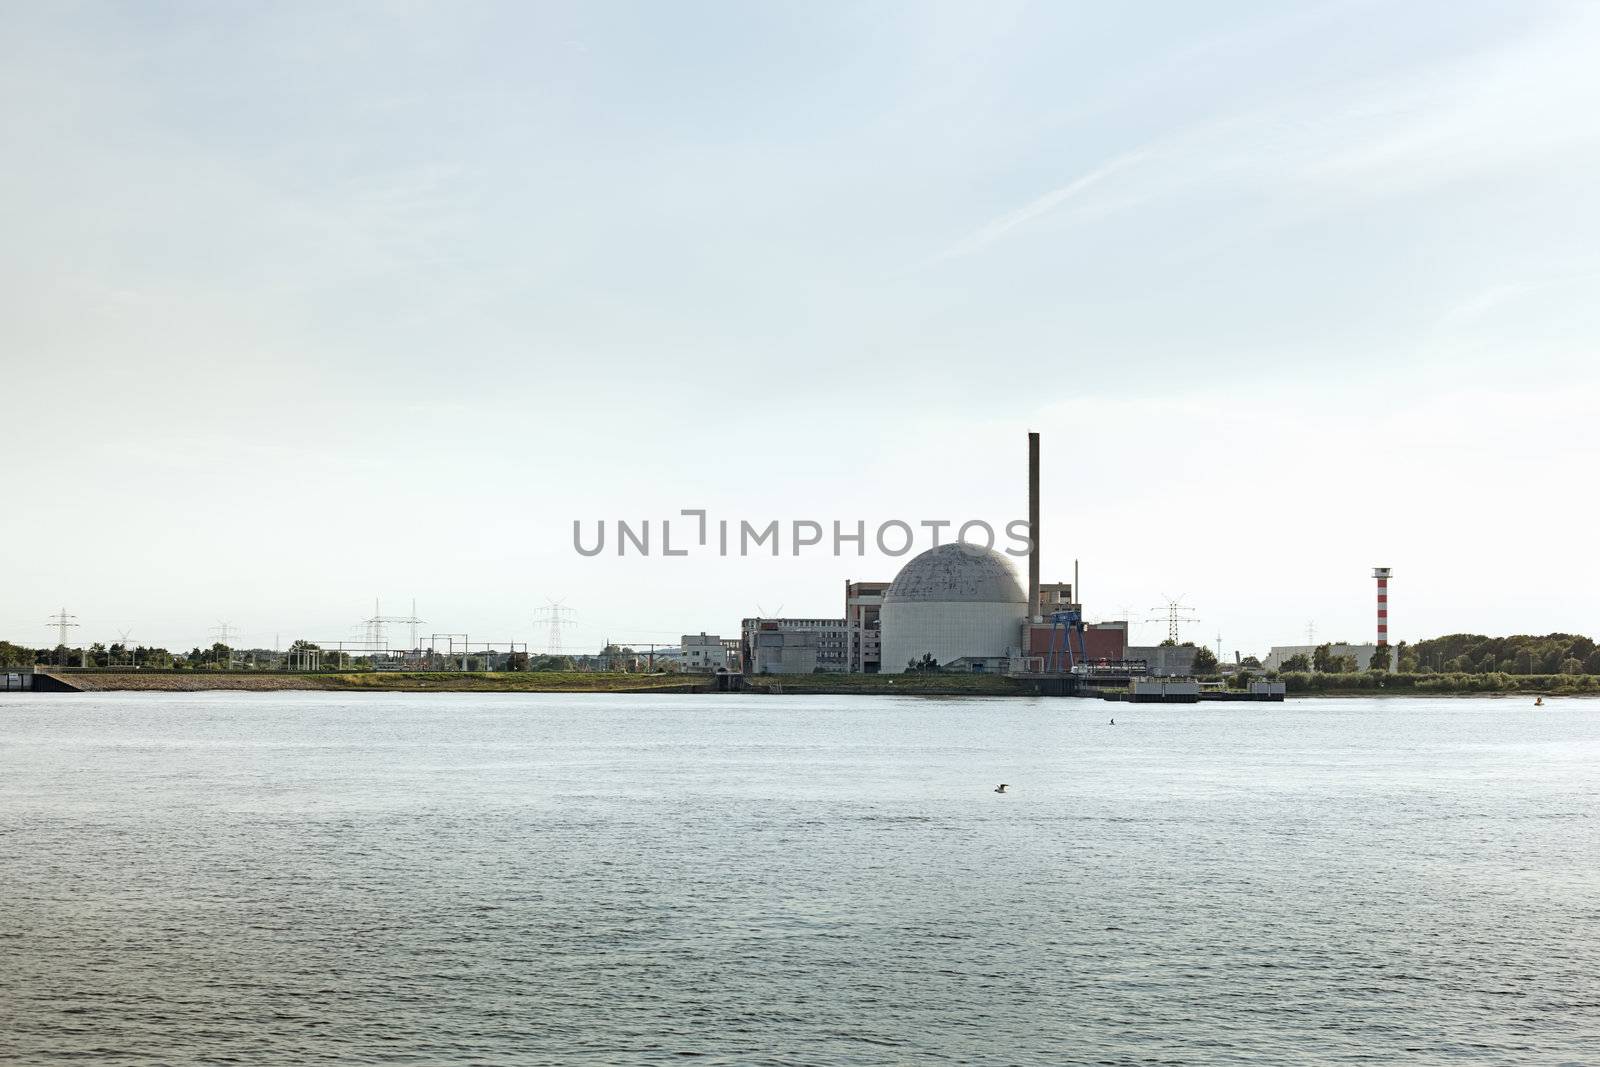 Nuclear plant near river by imarin